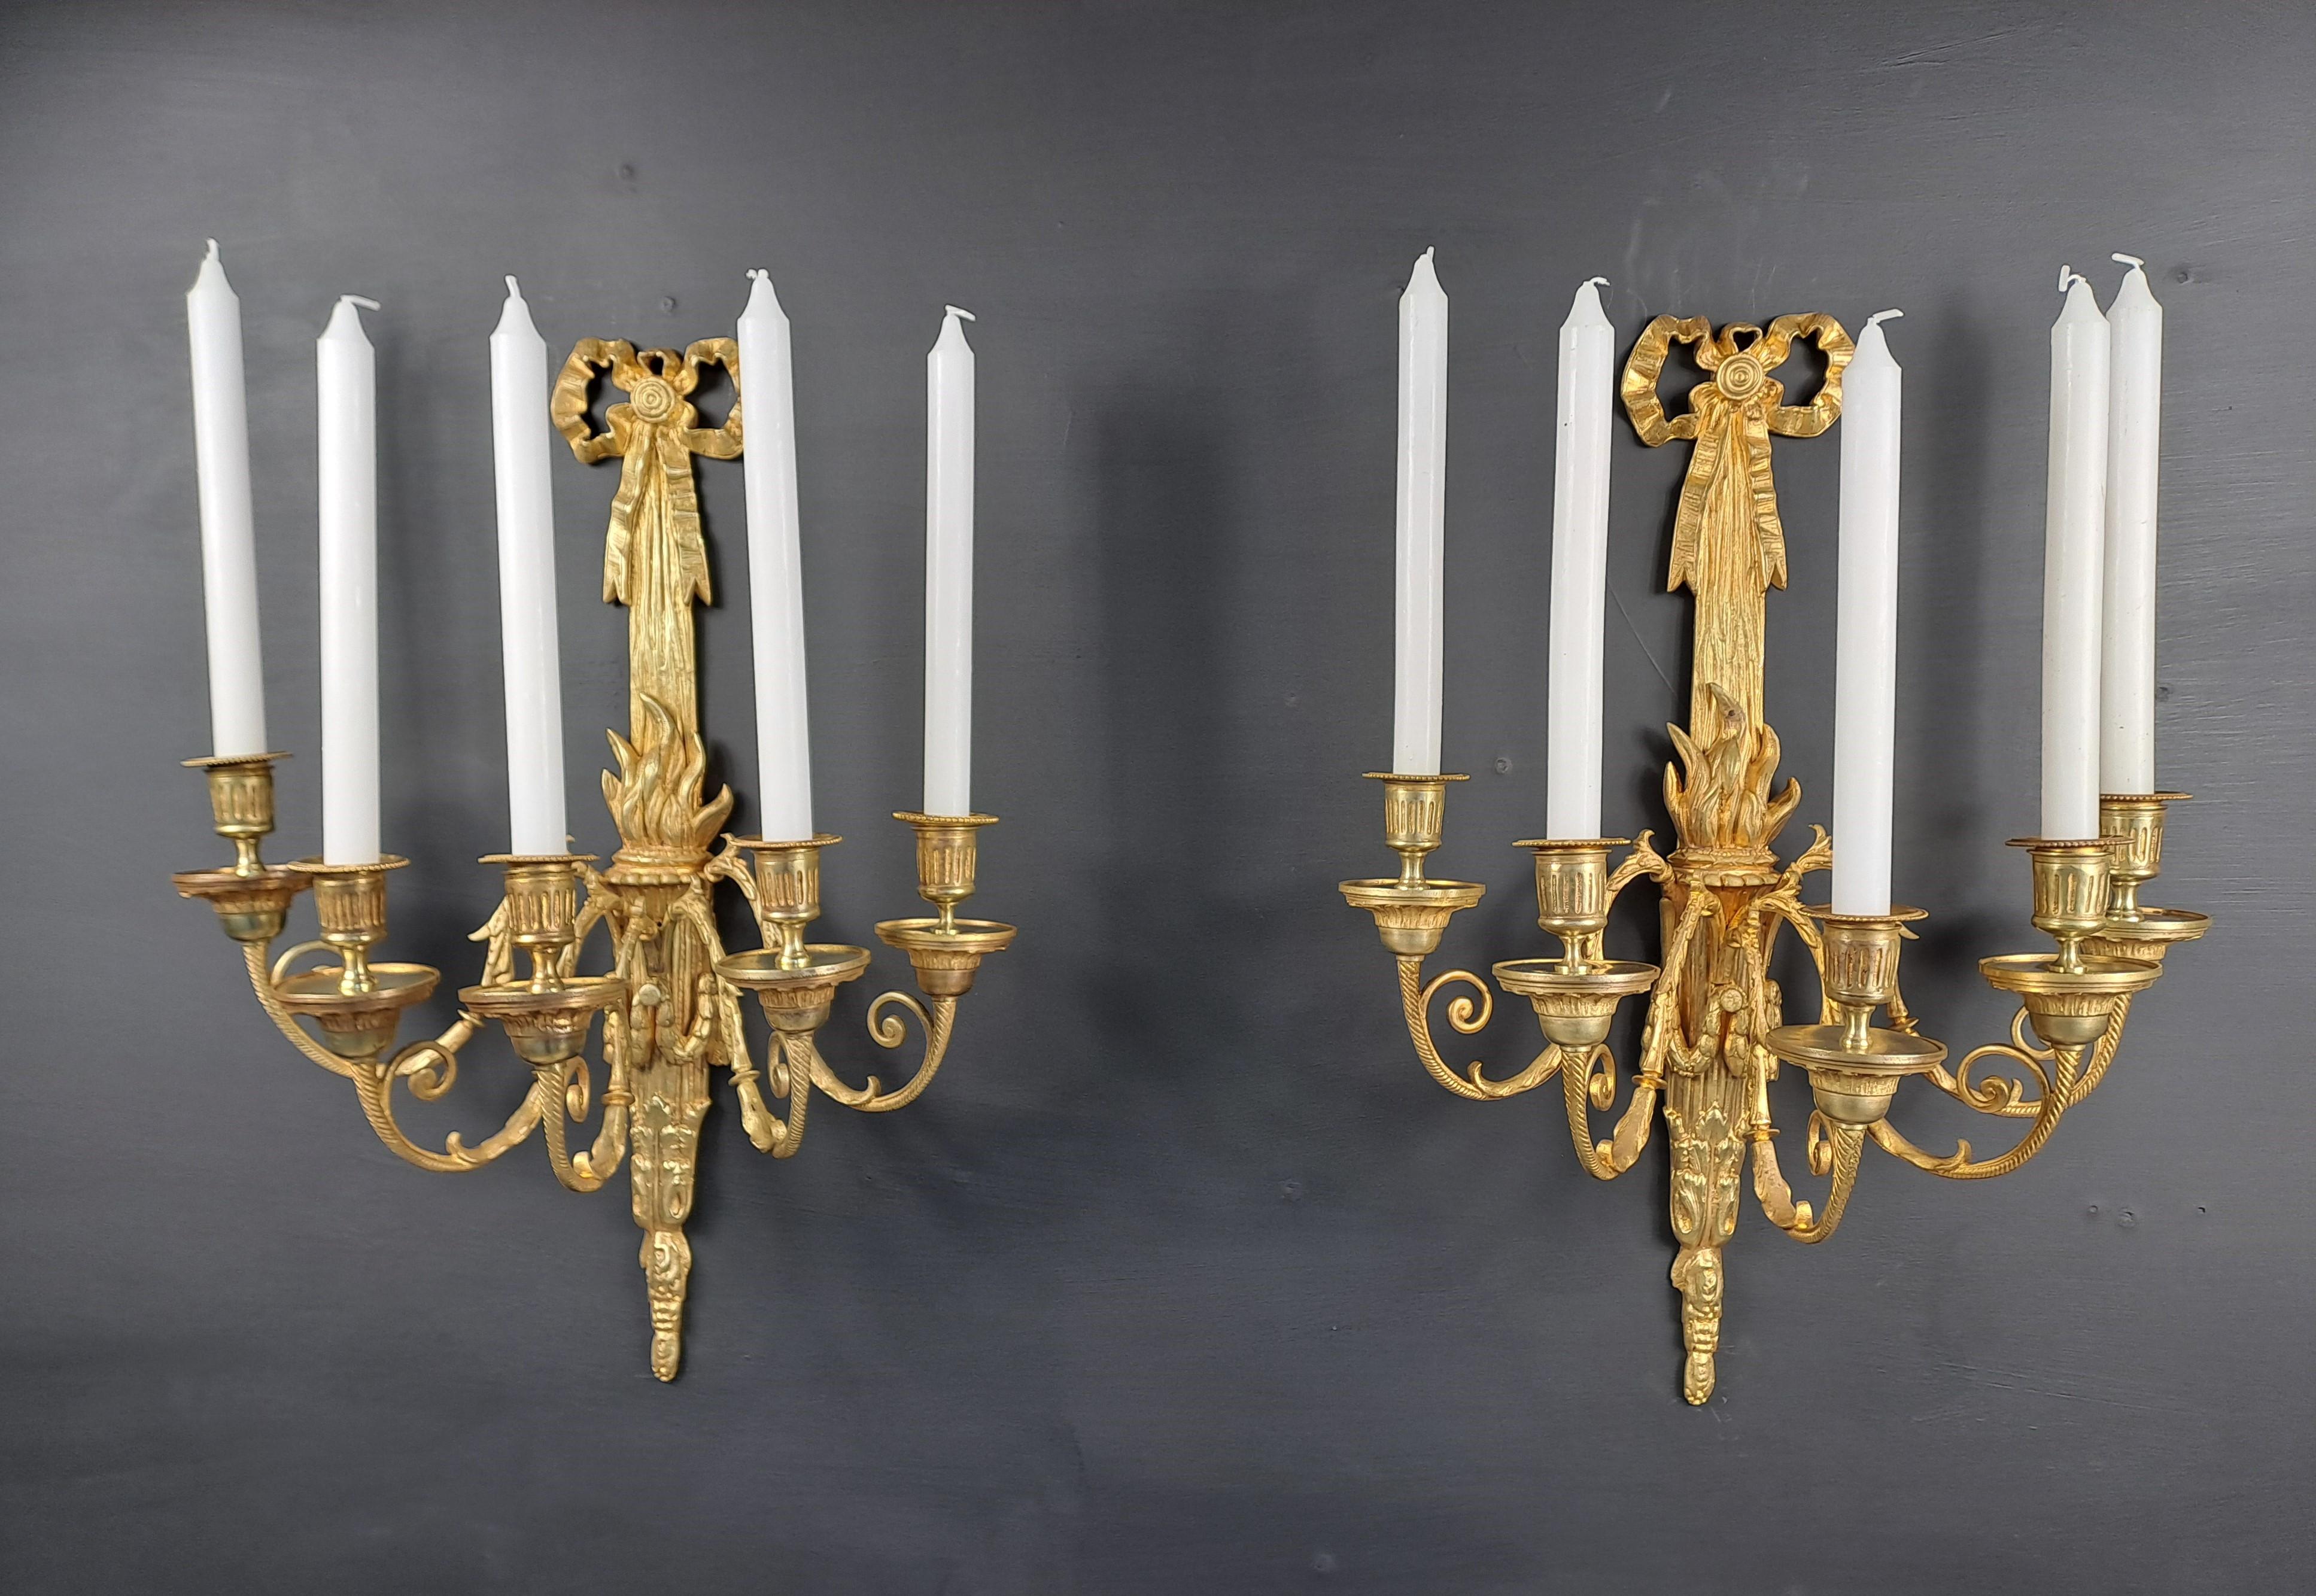 Large pair of Louis XVI style wall lights in chiseled and gilded bronze, decorated with a firepot and garland and presenting five arms of lights.

Work from the Napoleon III period, stamped VB and numbered on the reverse.

Good condition, not